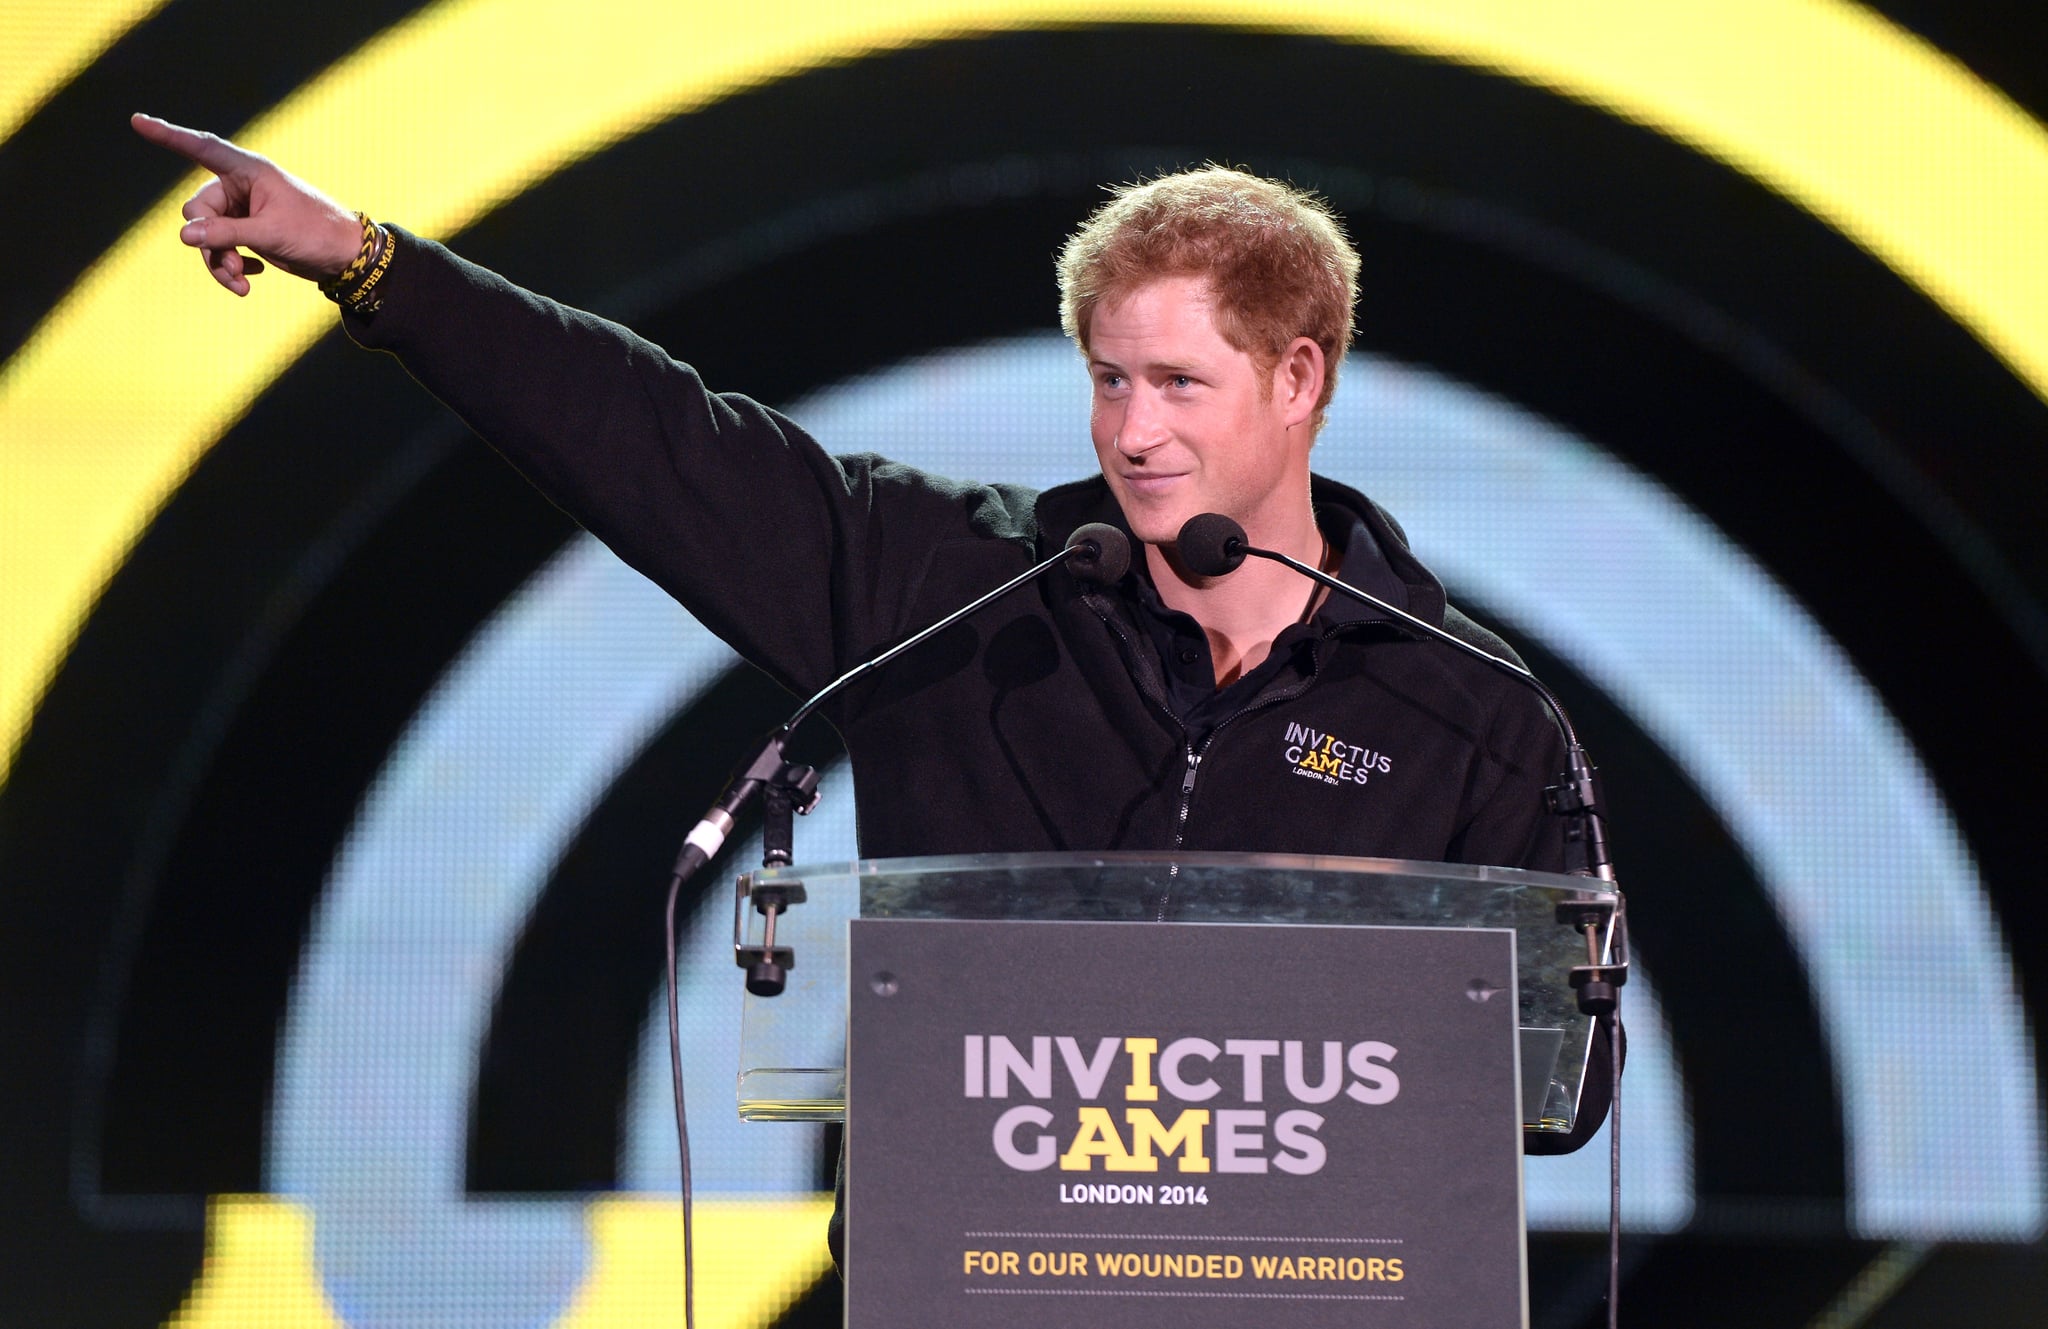 What Are the Invictus Games?